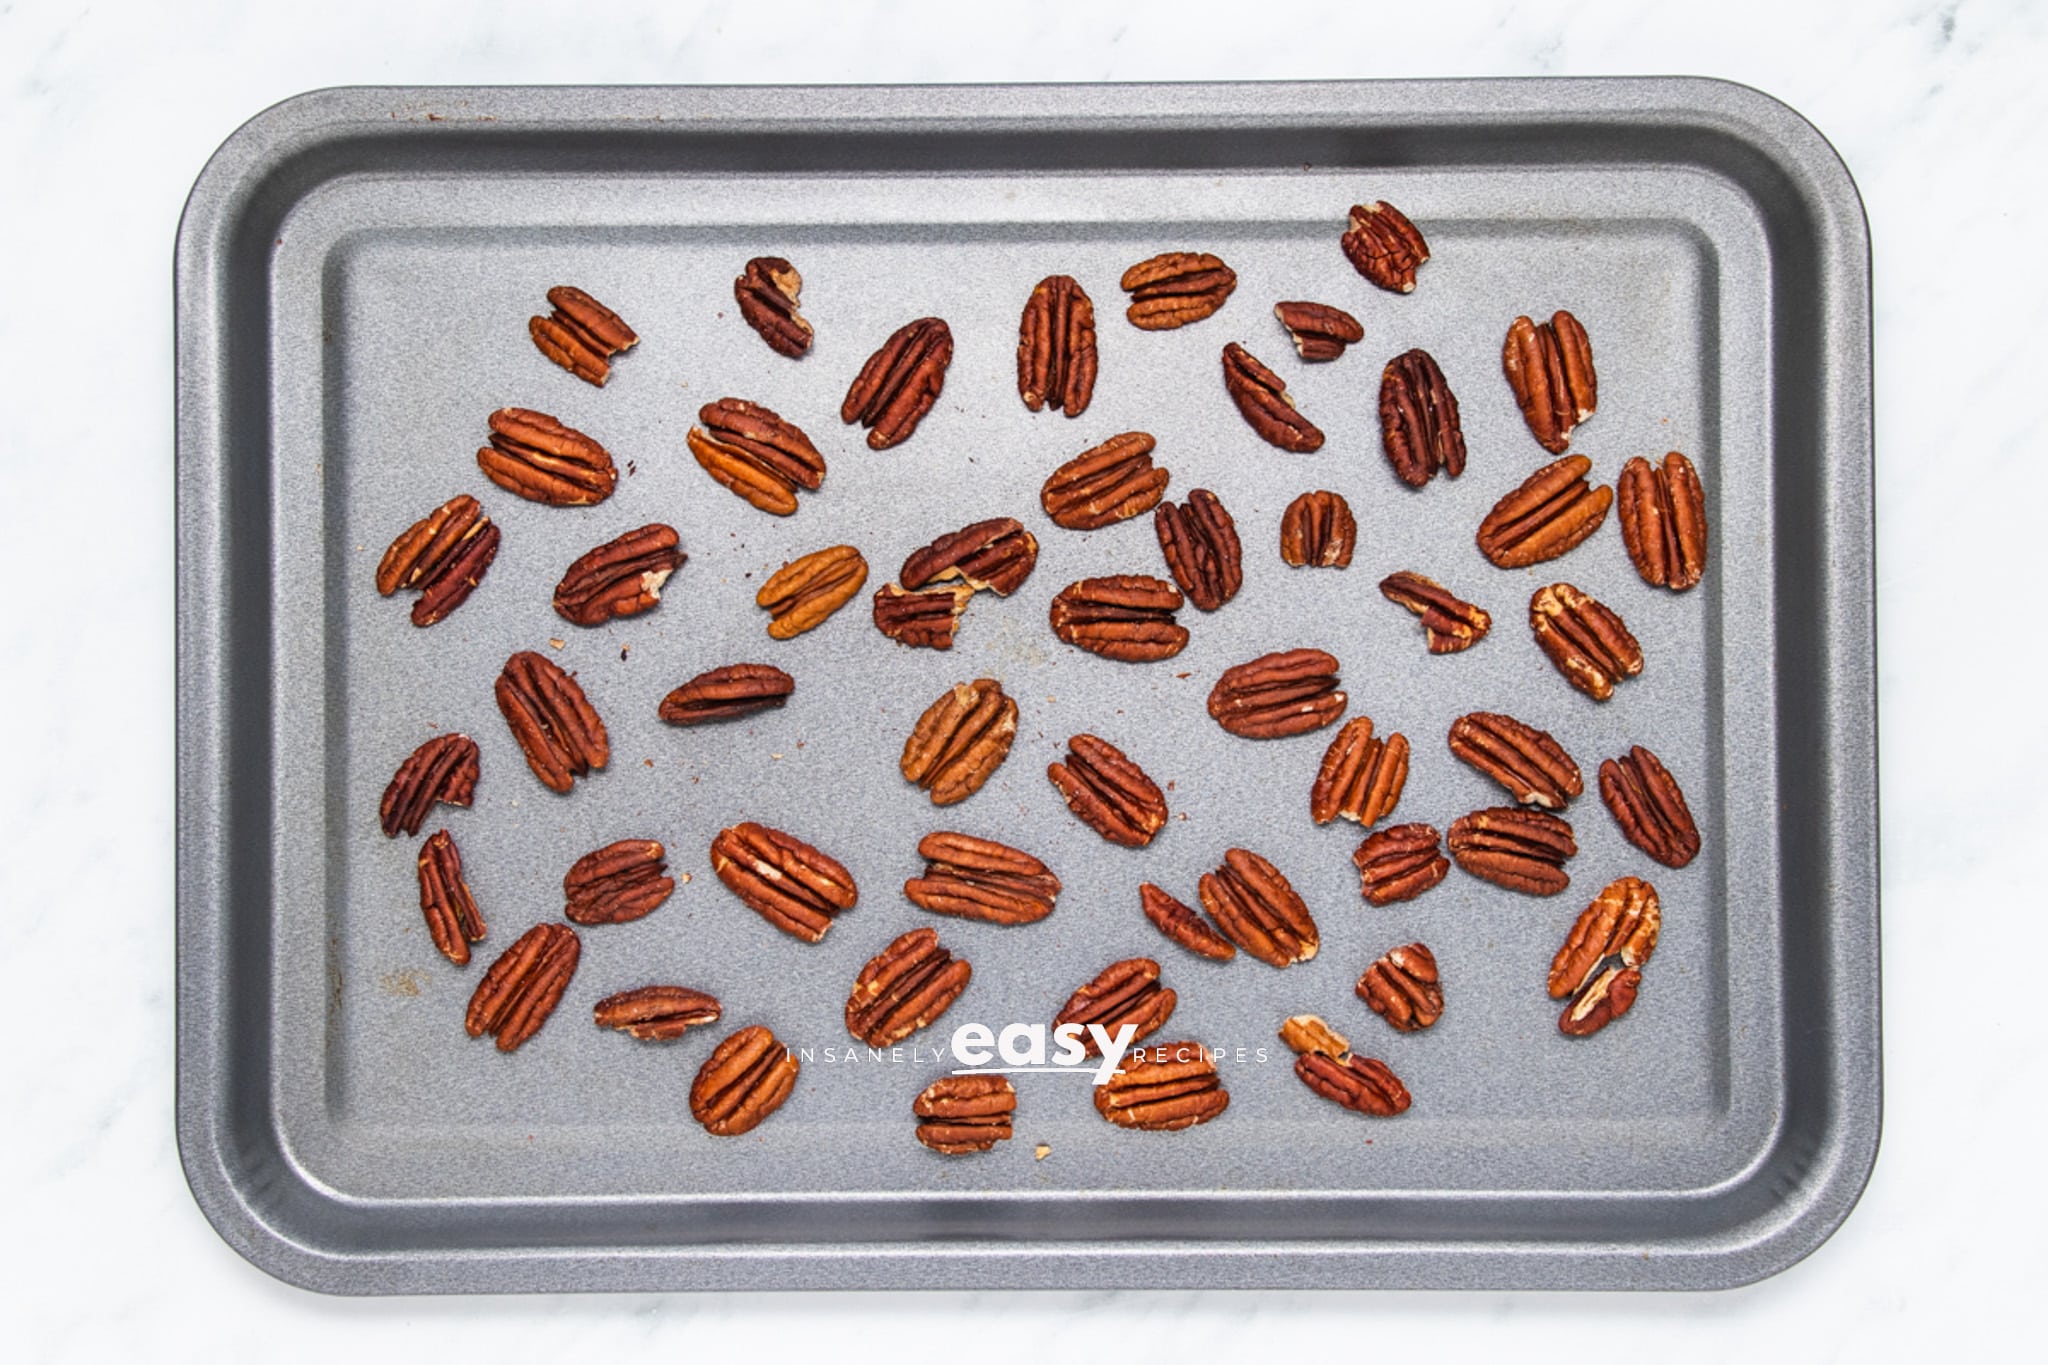 Pecan halves spread out on a baking sheet for toasting.